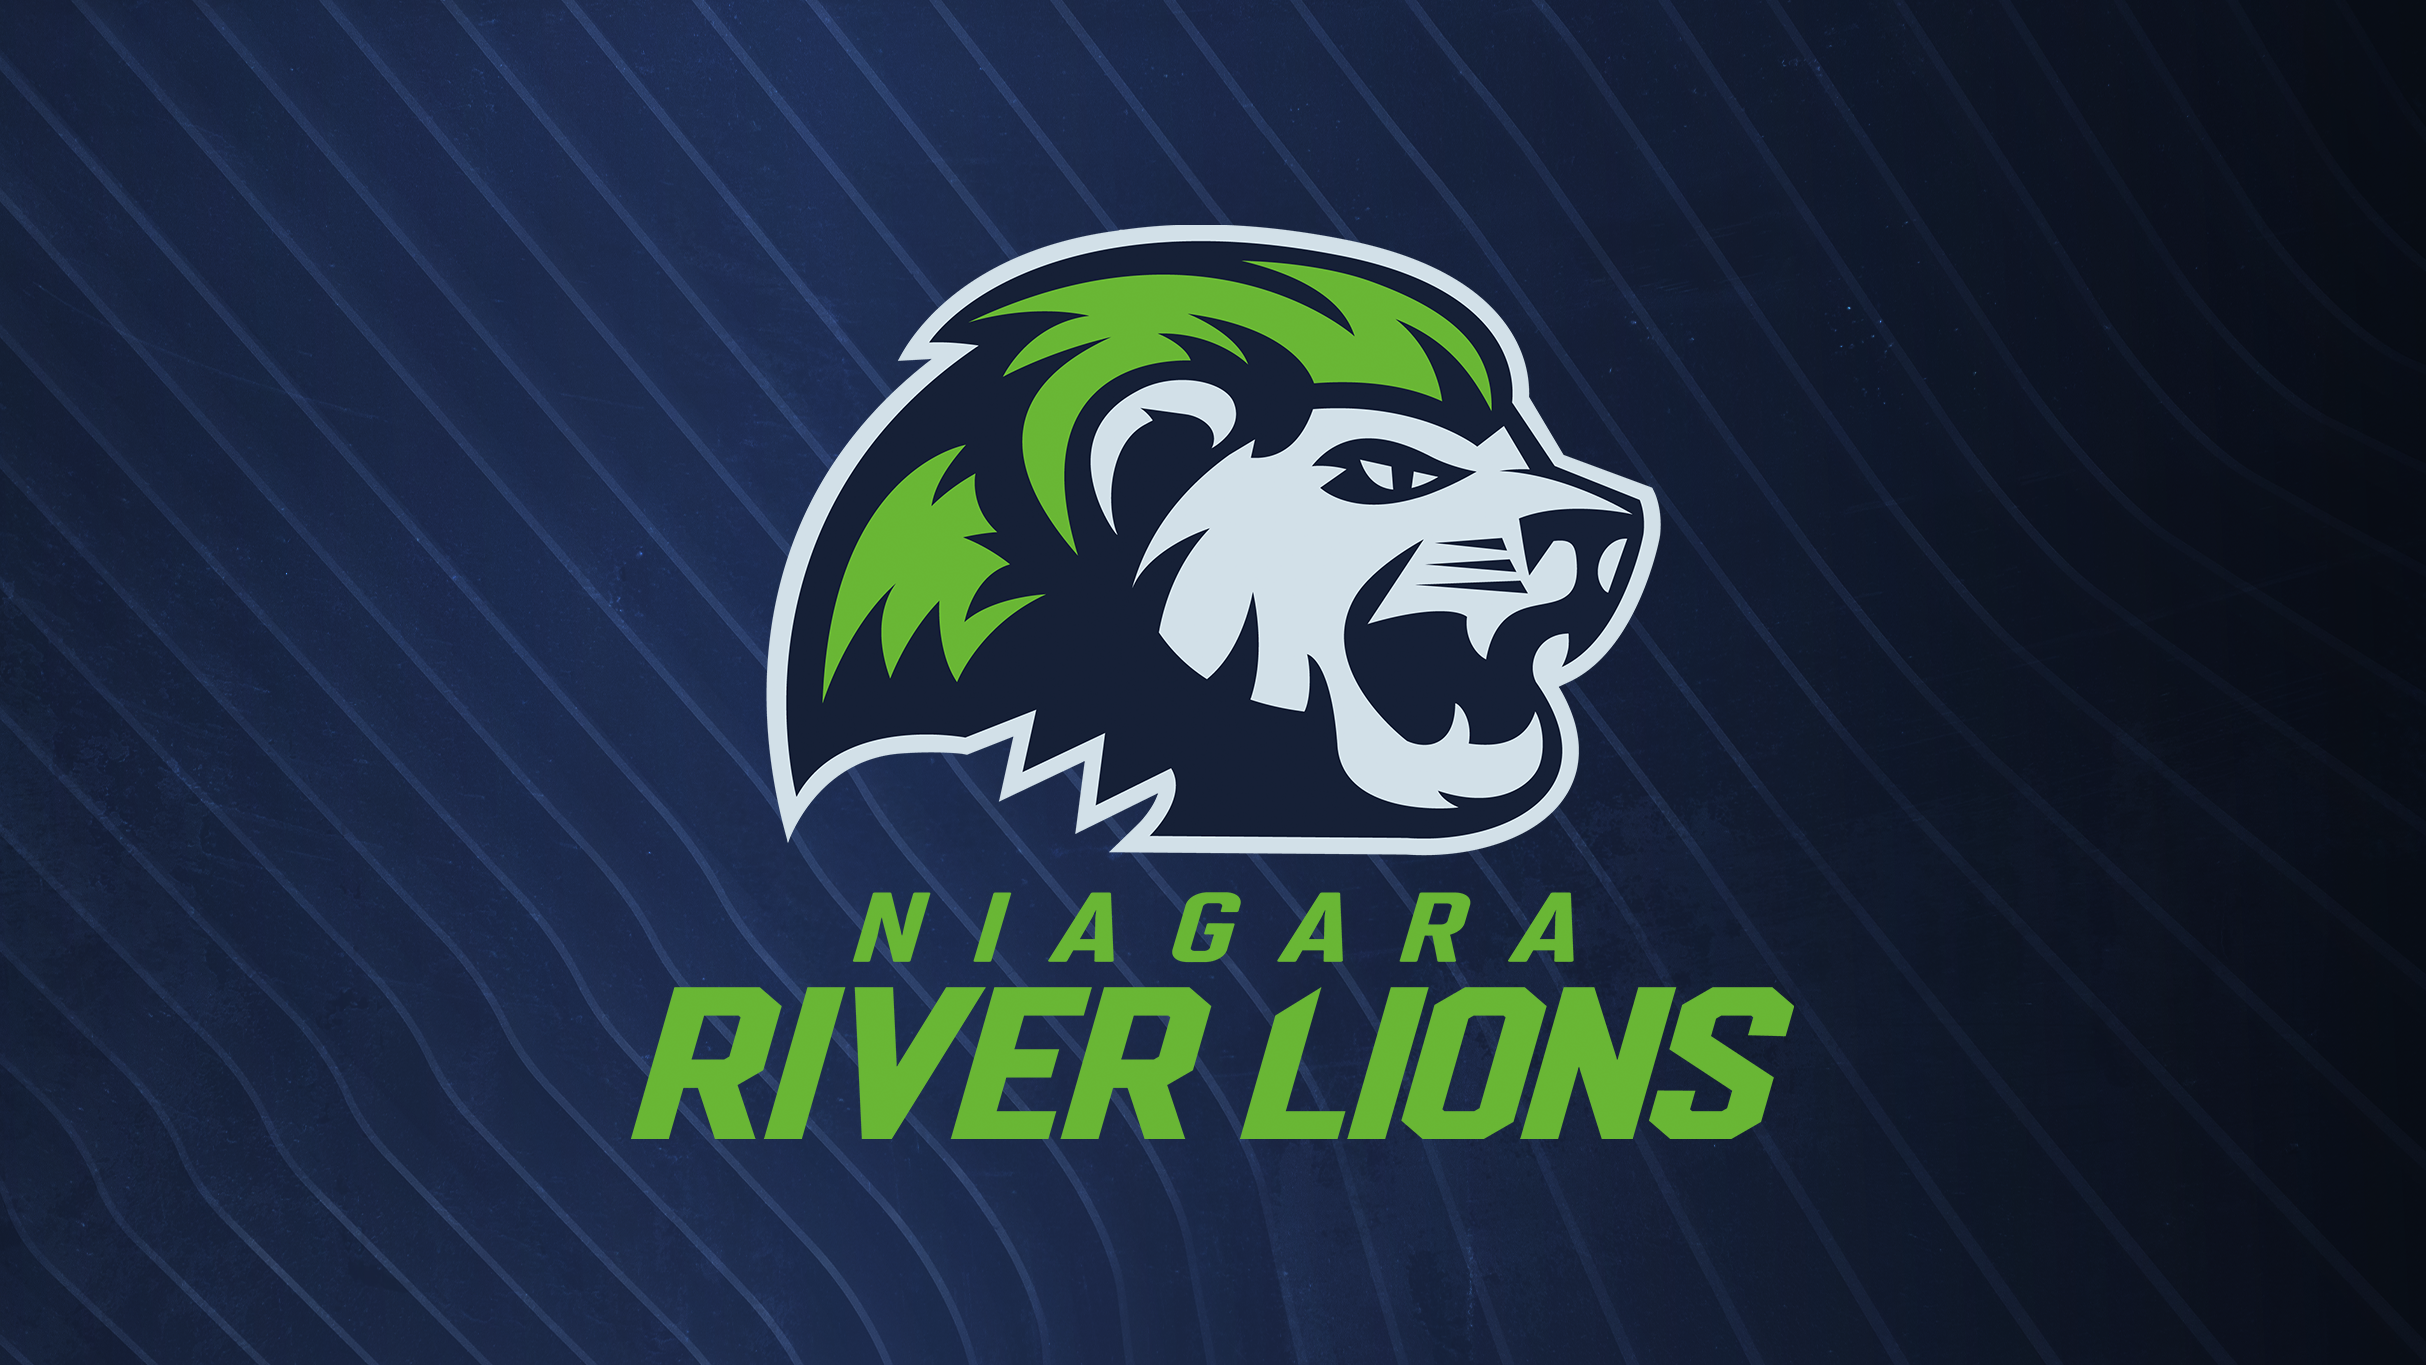 Niagara River Lions presale password for real tickets in St Catharines